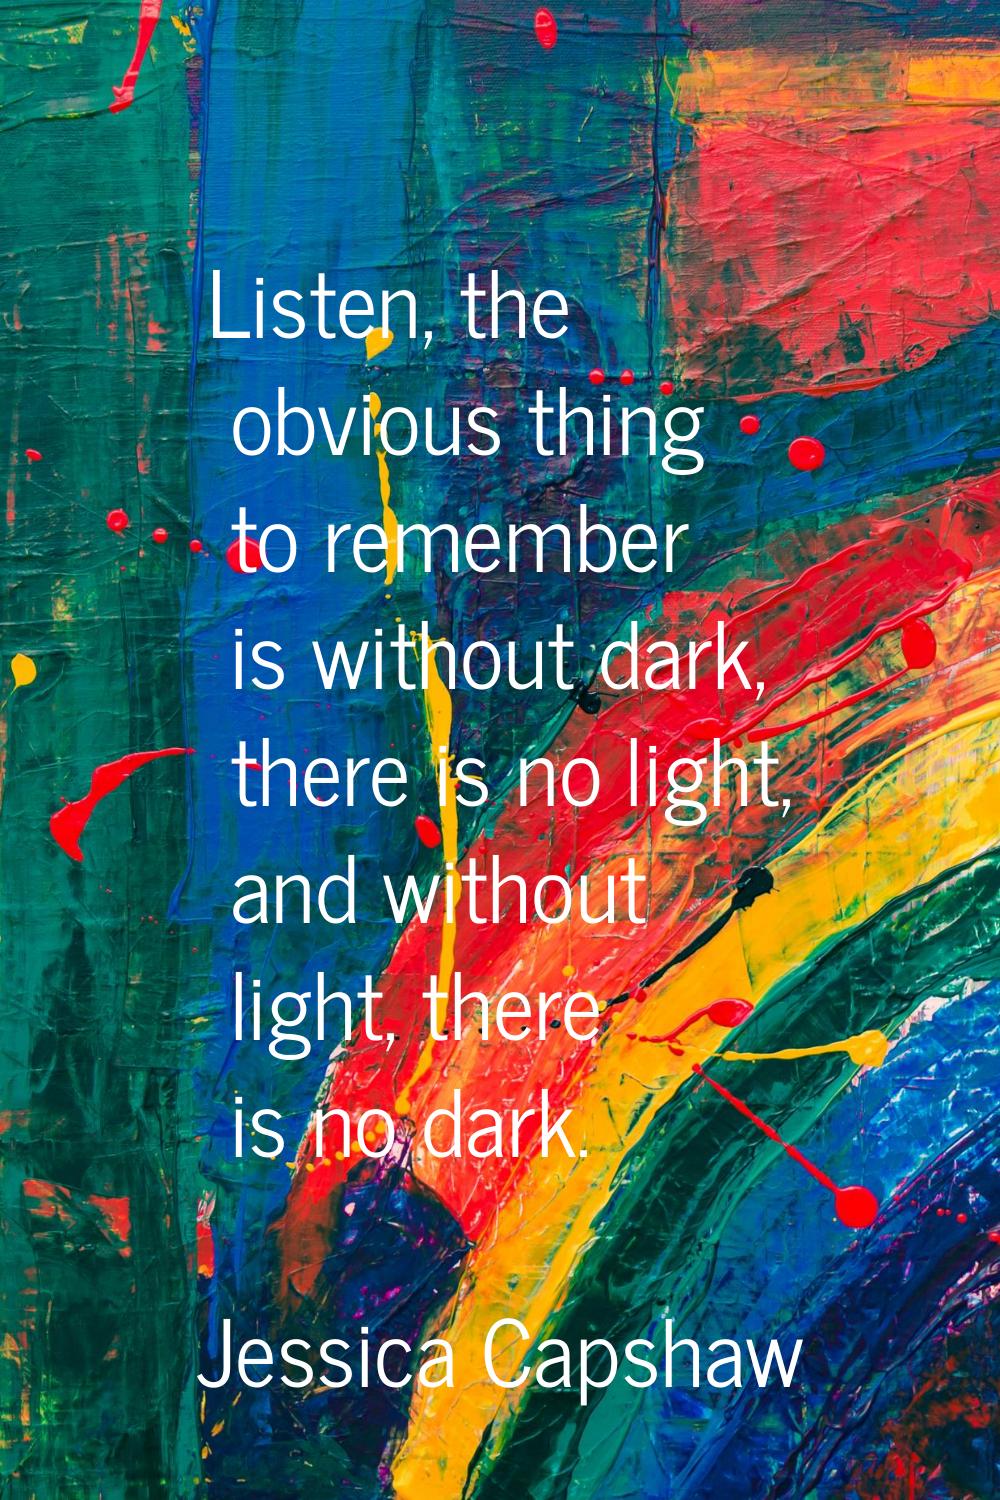 Listen, the obvious thing to remember is without dark, there is no light, and without light, there 